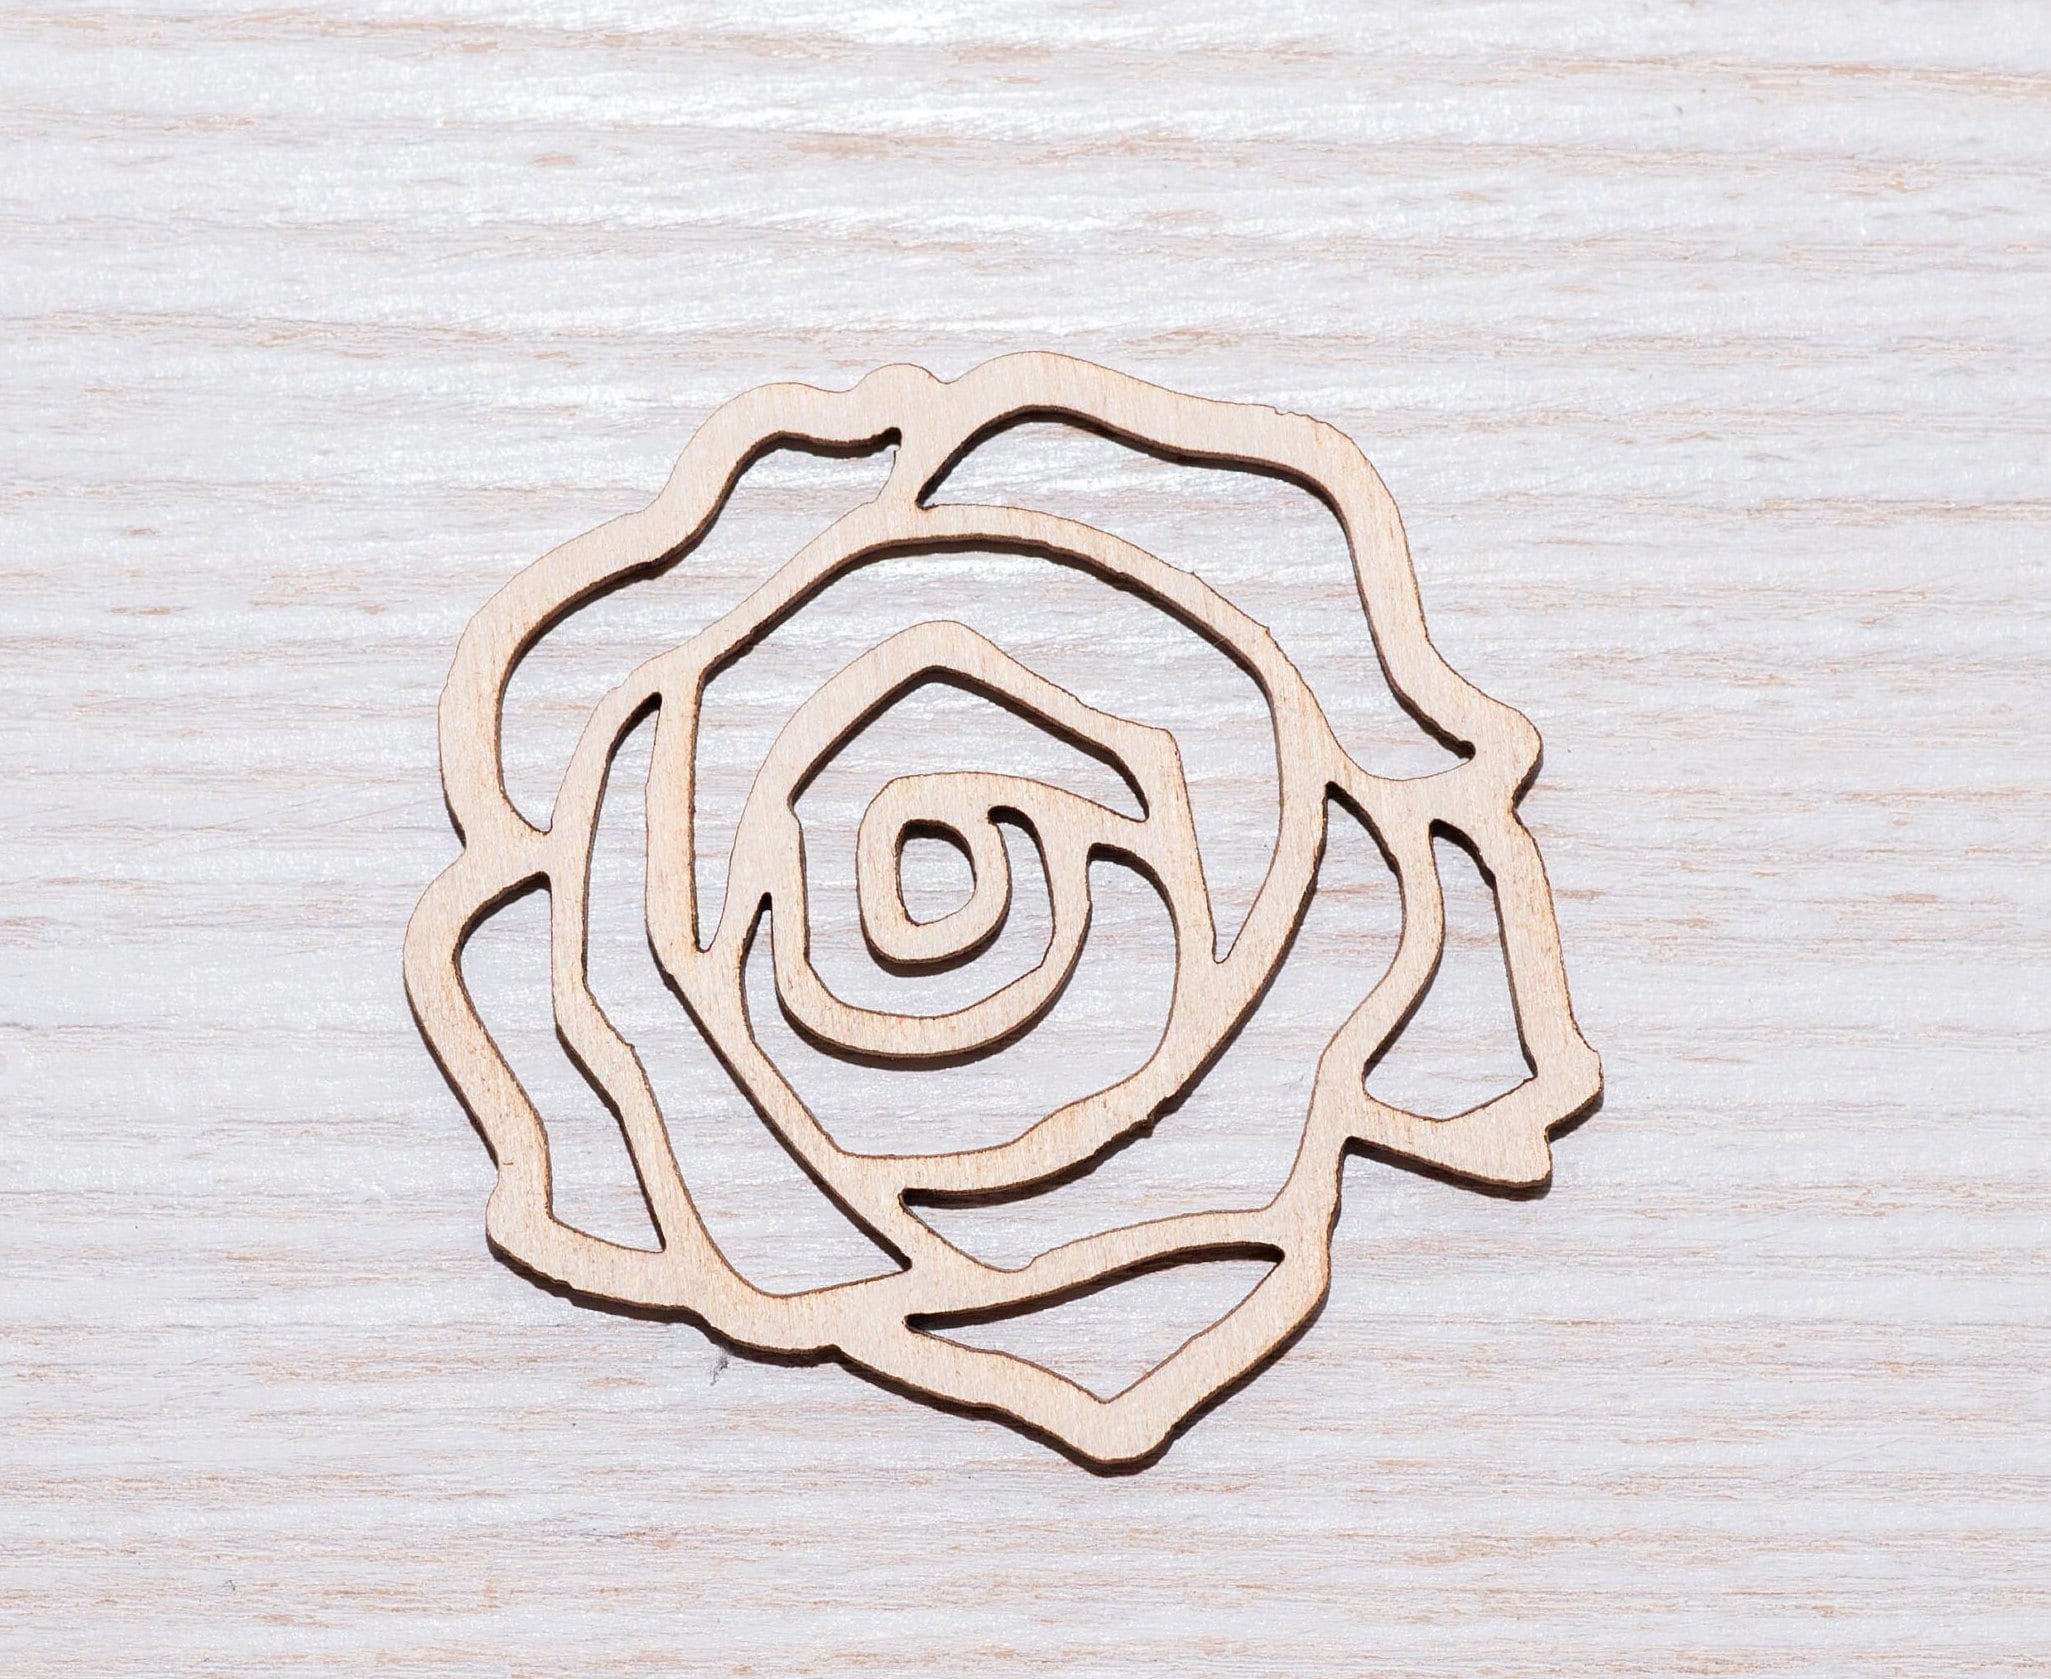 200-Piece Wooden Flower Leaf Embellishments, Assorted Shapes Wood Cutouts  Shapes Wooden Craft Tag Decoupage Embellishments DIY Scrapbooking Card